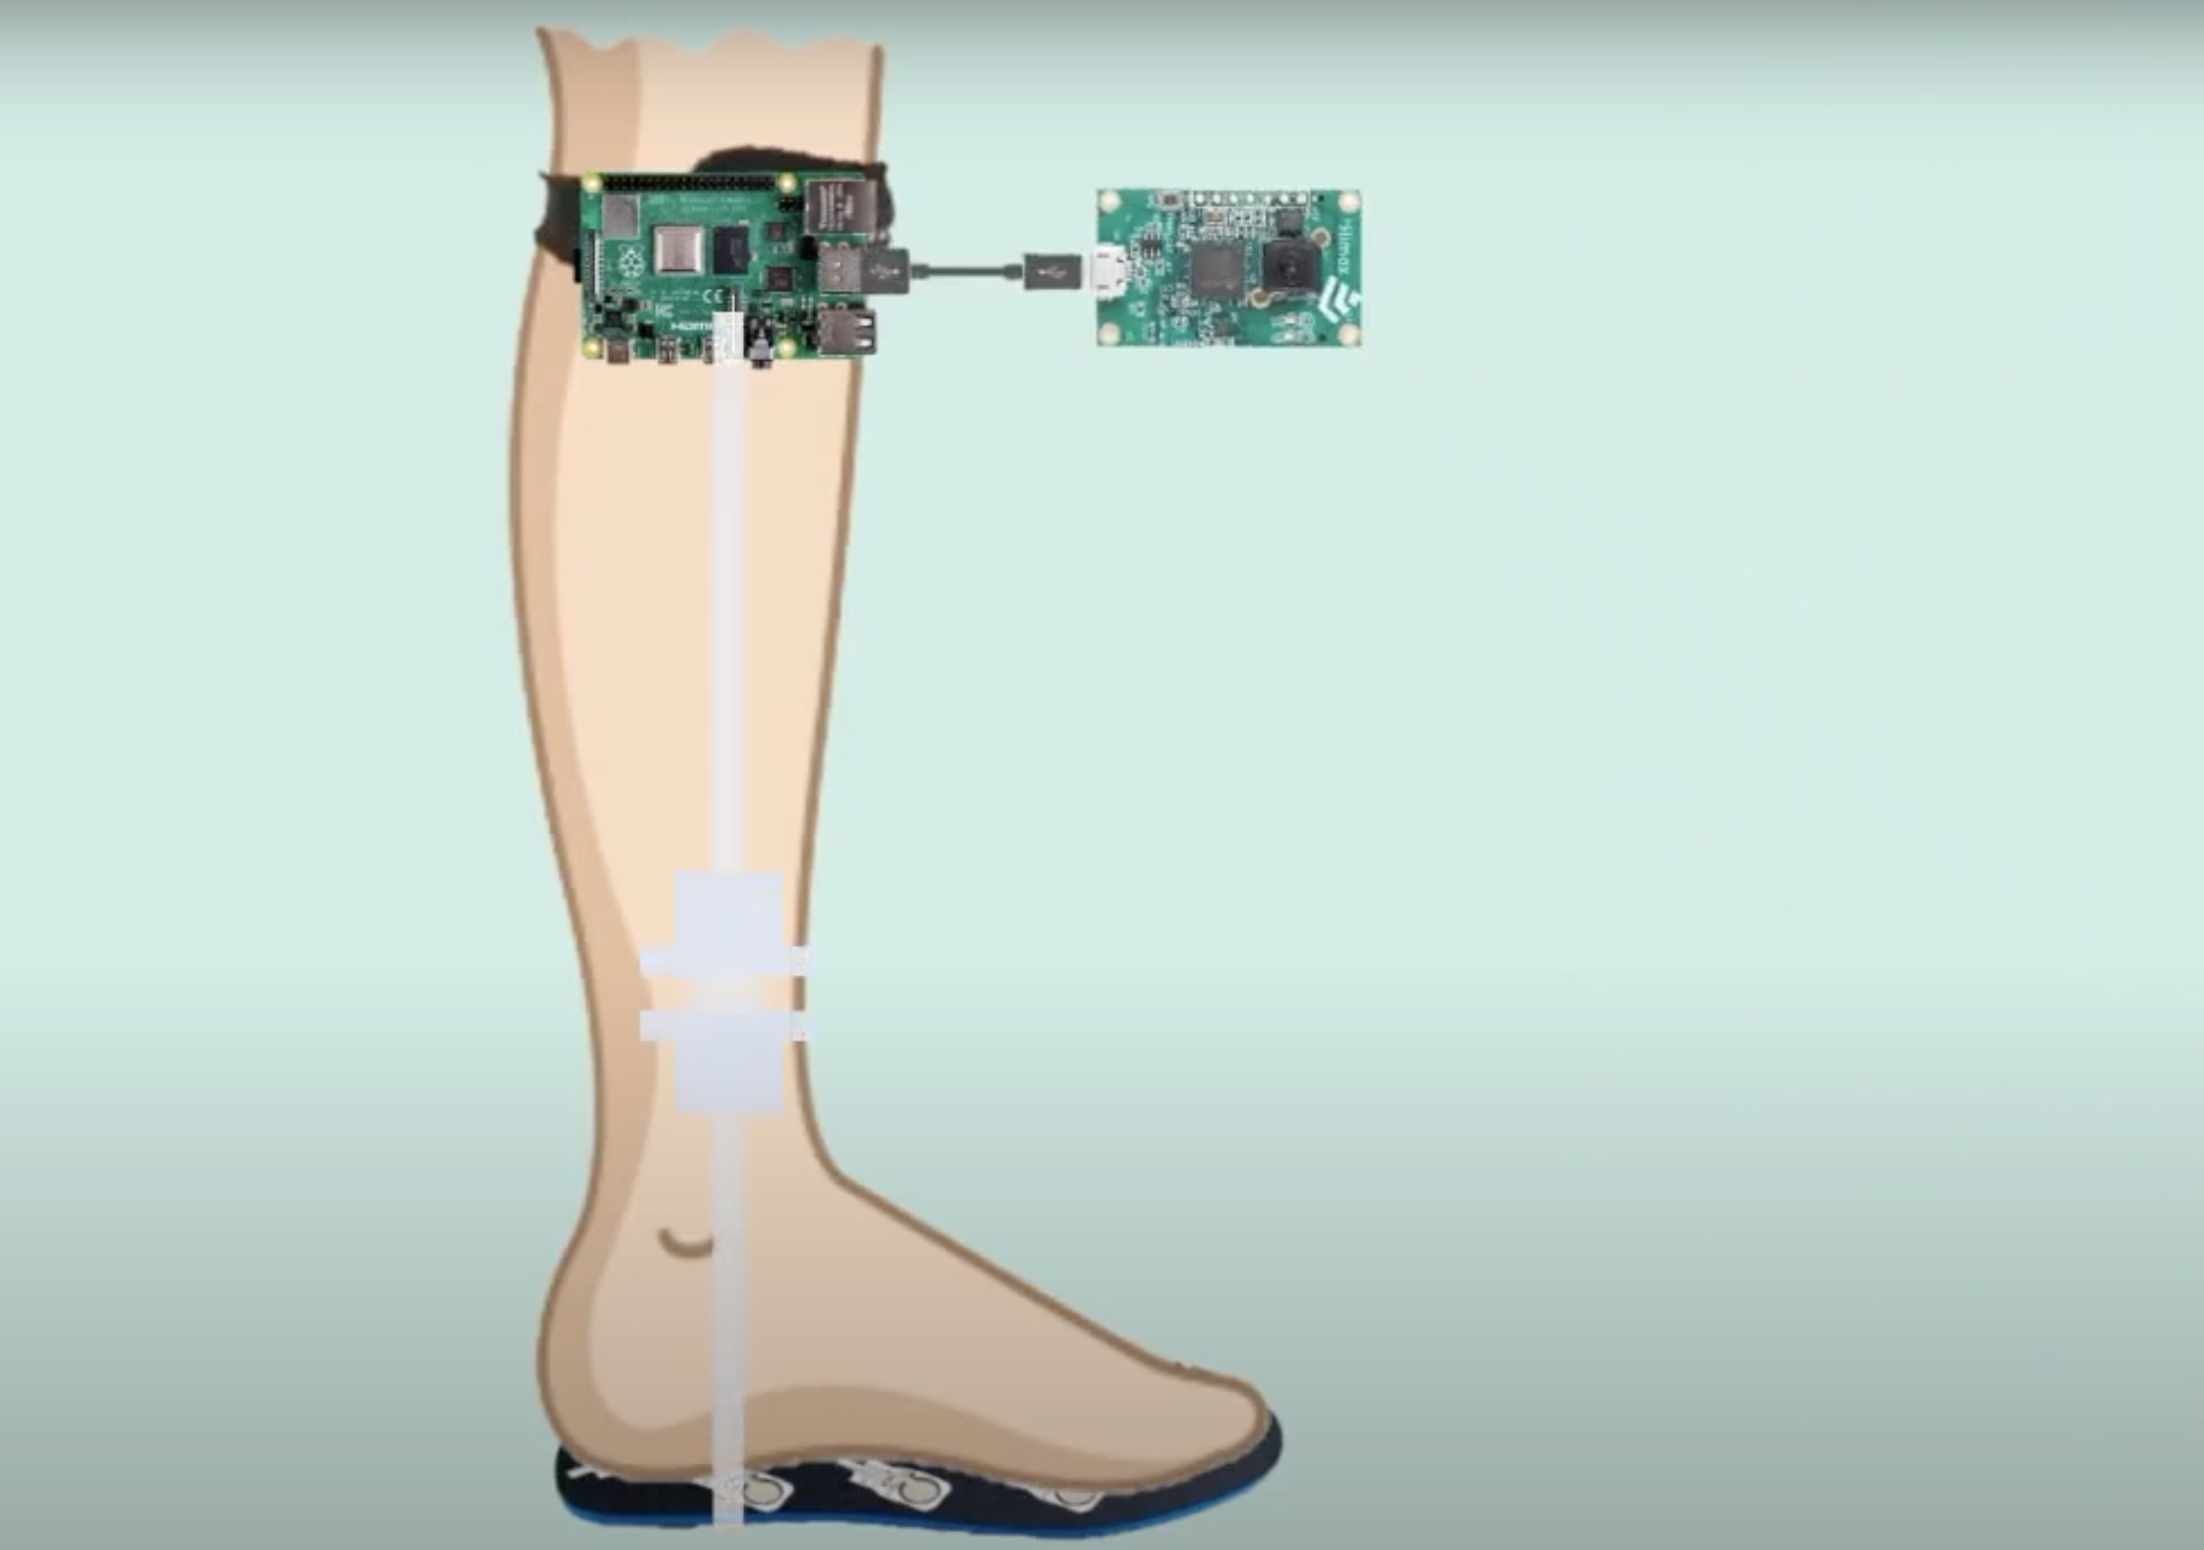 raspberry pi strapped to user's knee to detect Parkinson's Disease